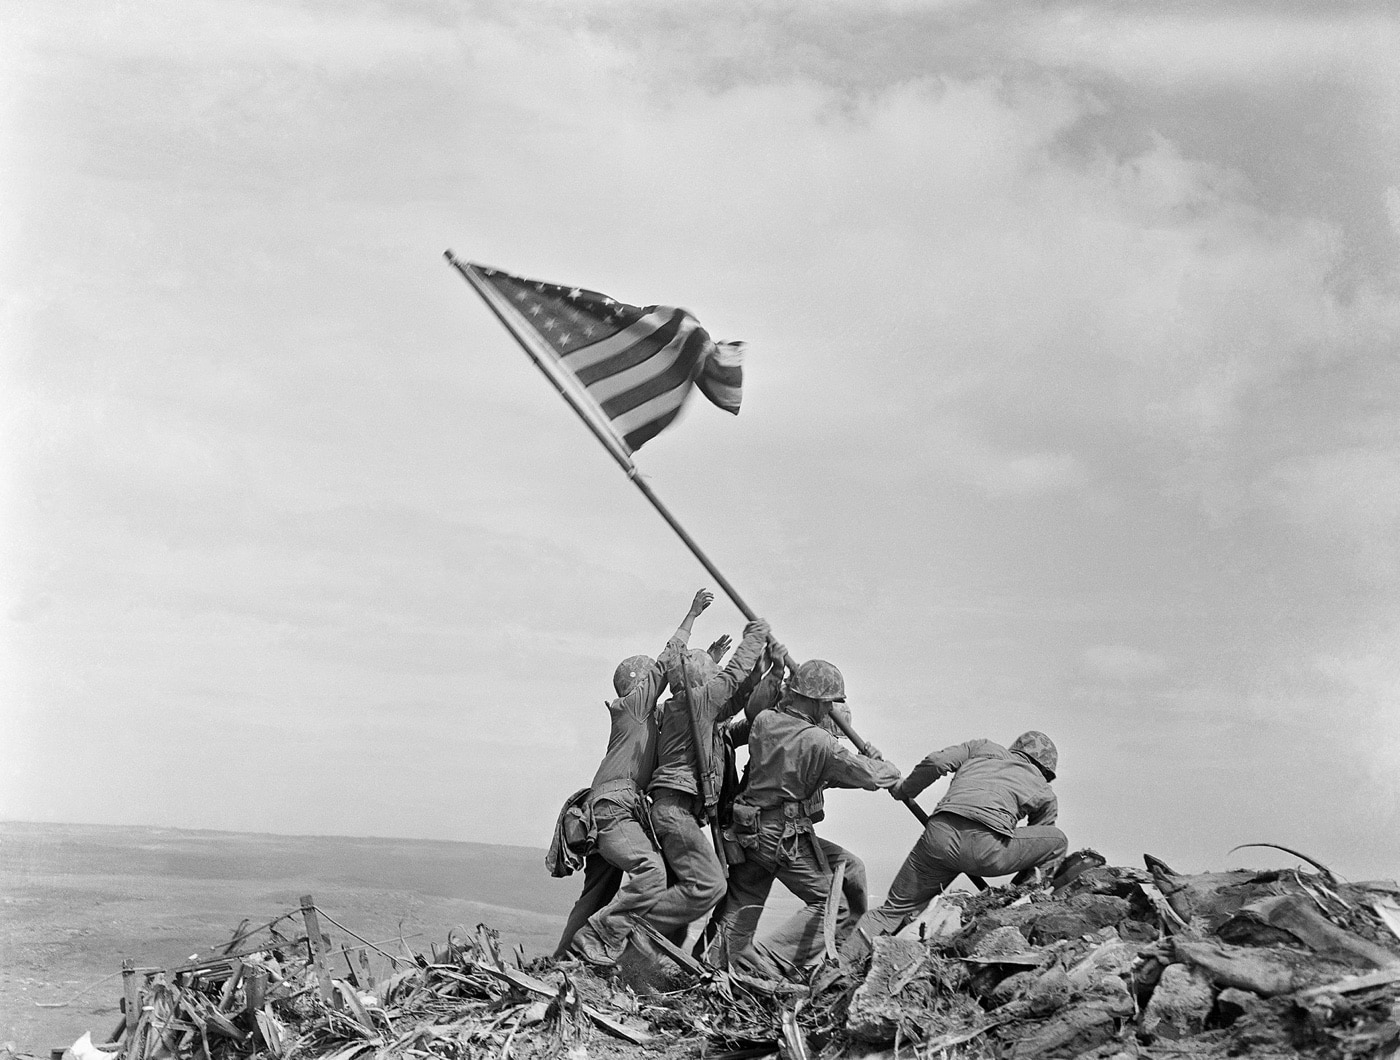 In this photograph, Associated Press photographer Joe Rosenthal took a film photograph of 4 U.S. Marines raising the flag of the United States of America on Mount Suribachi during the Battle of Iwo Jima in WW2. Part of the Pacific War, Iwo Jima was a volcanic island that had to be taken to provide P-51 Mustang escort fighter aircraft to Boeing B-29 Superfortress and Boeing B-17 Flying Fortress air raids on Japan. This helped to lead to the surrender of Japan and the Victory over Japan Day (VJ Day). 